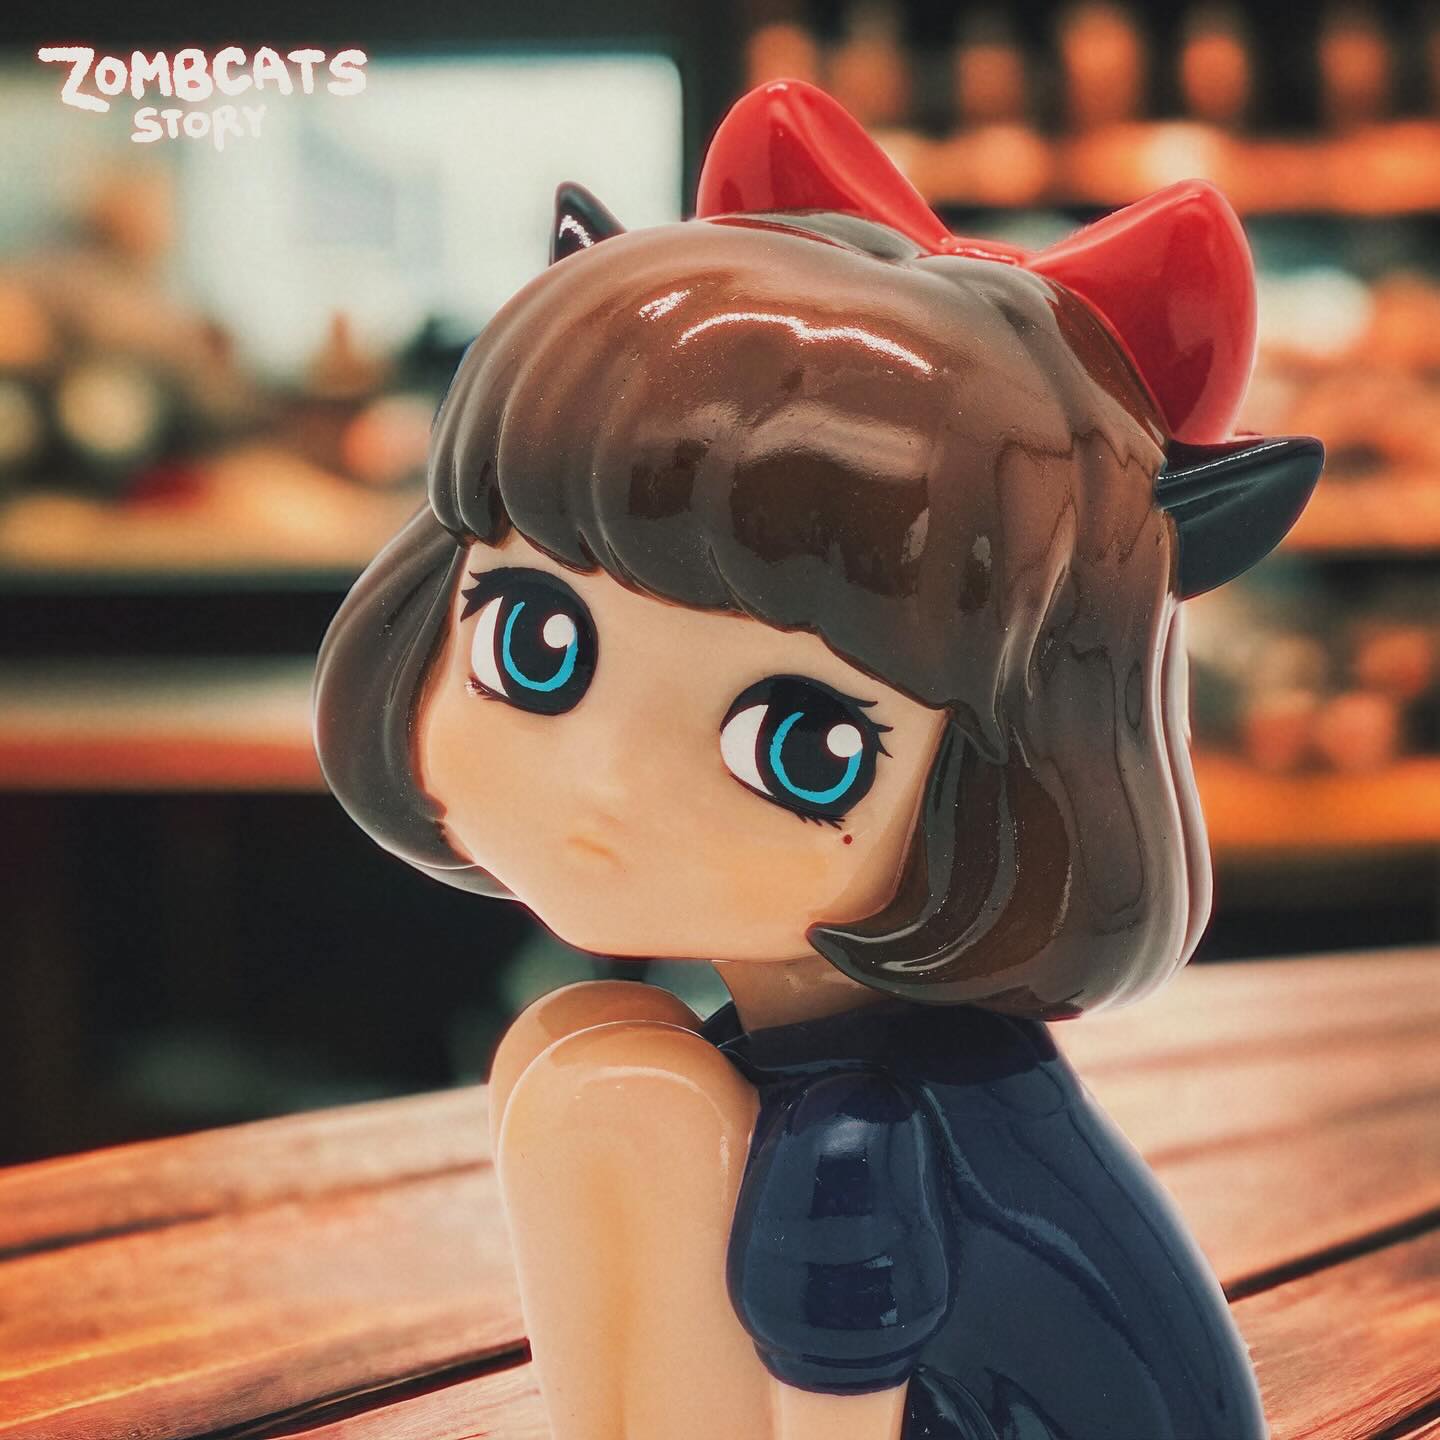 Nekomume figurine - toy of a girl with red bow, close-up of eyes and bodysuit, limited edition vinyl, 7cm.